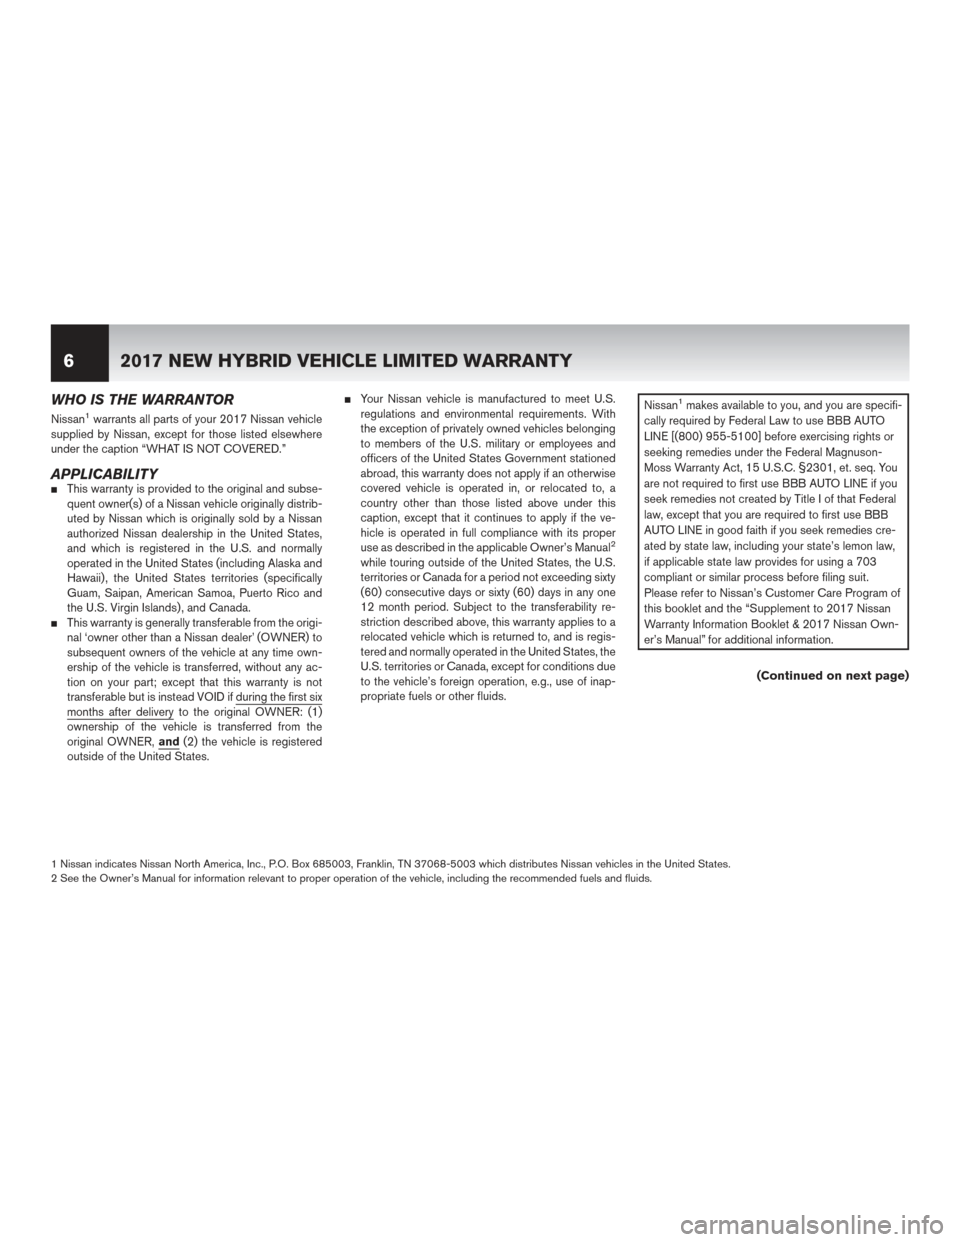 NISSAN MURANO HYBRID 2017 3.G Warranty Booklet WHO IS THE WARRANTOR
Nissan1warrants all parts of your 2017 Nissan vehicle
supplied by Nissan, except for those listed elsewhere
under the caption “WHAT IS NOT COVERED.”
APPLICABILITYThis warrant